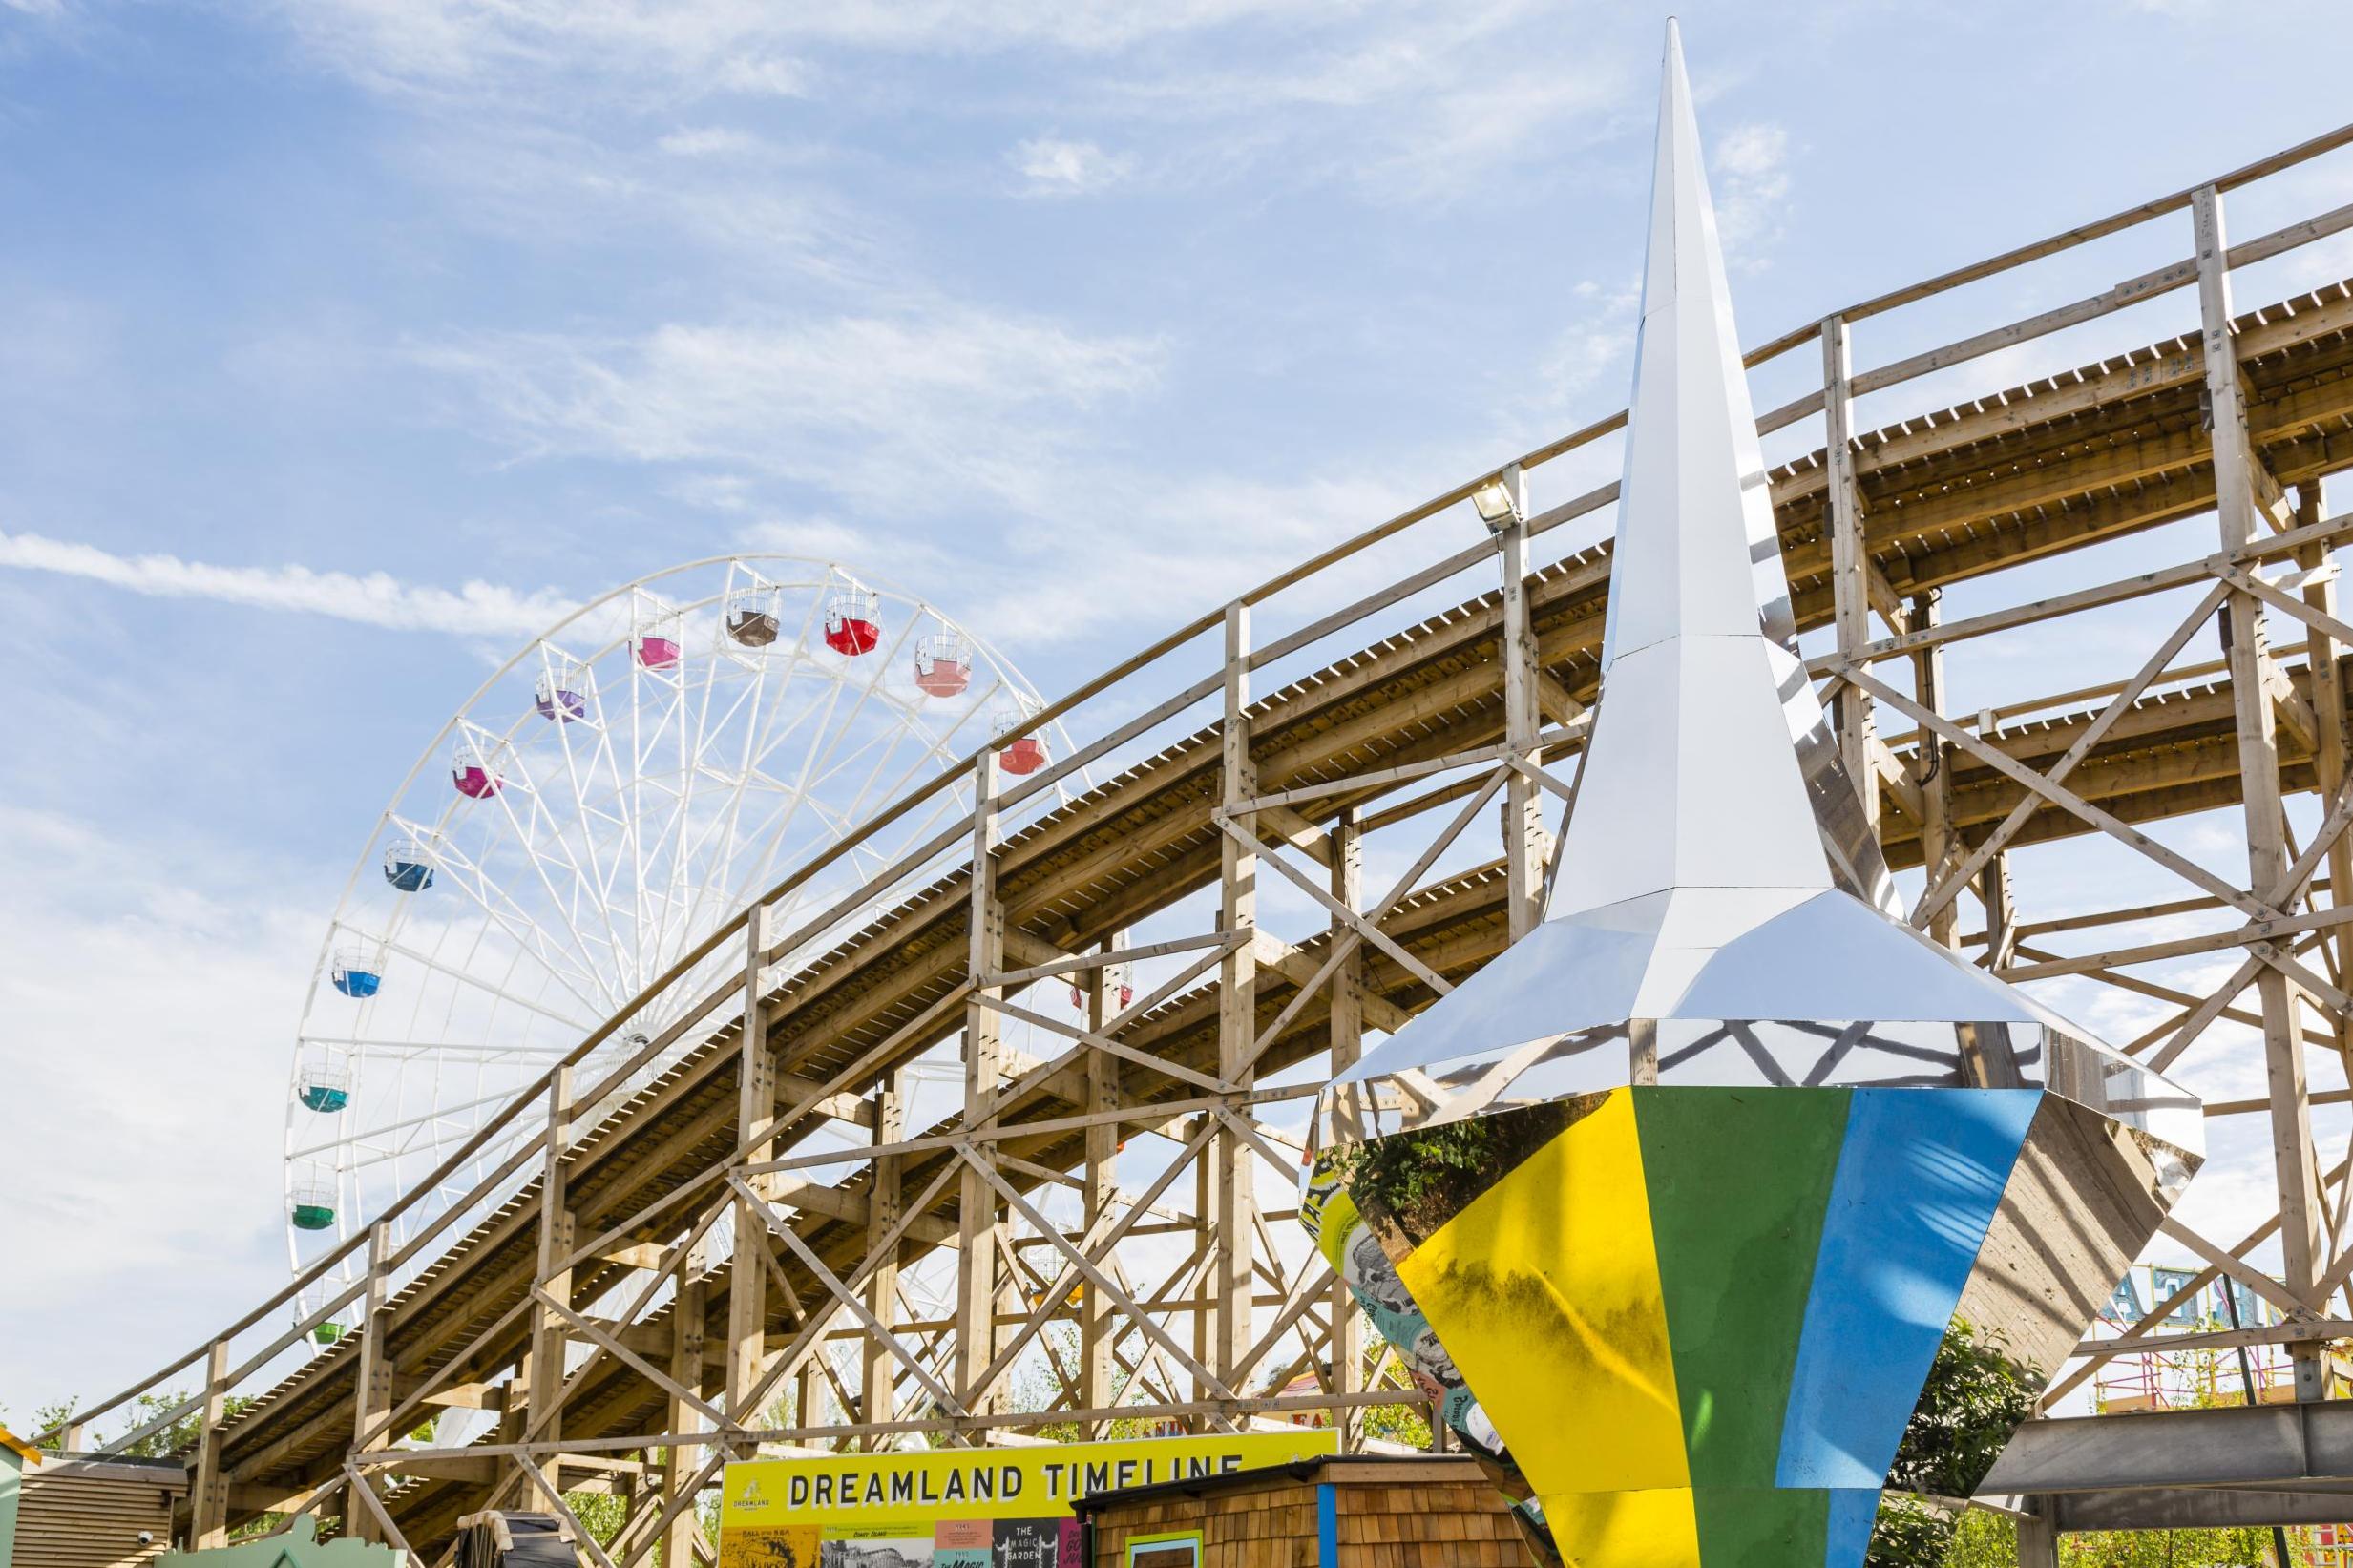 The new-look Dreamland will harken back to its Victorian roots